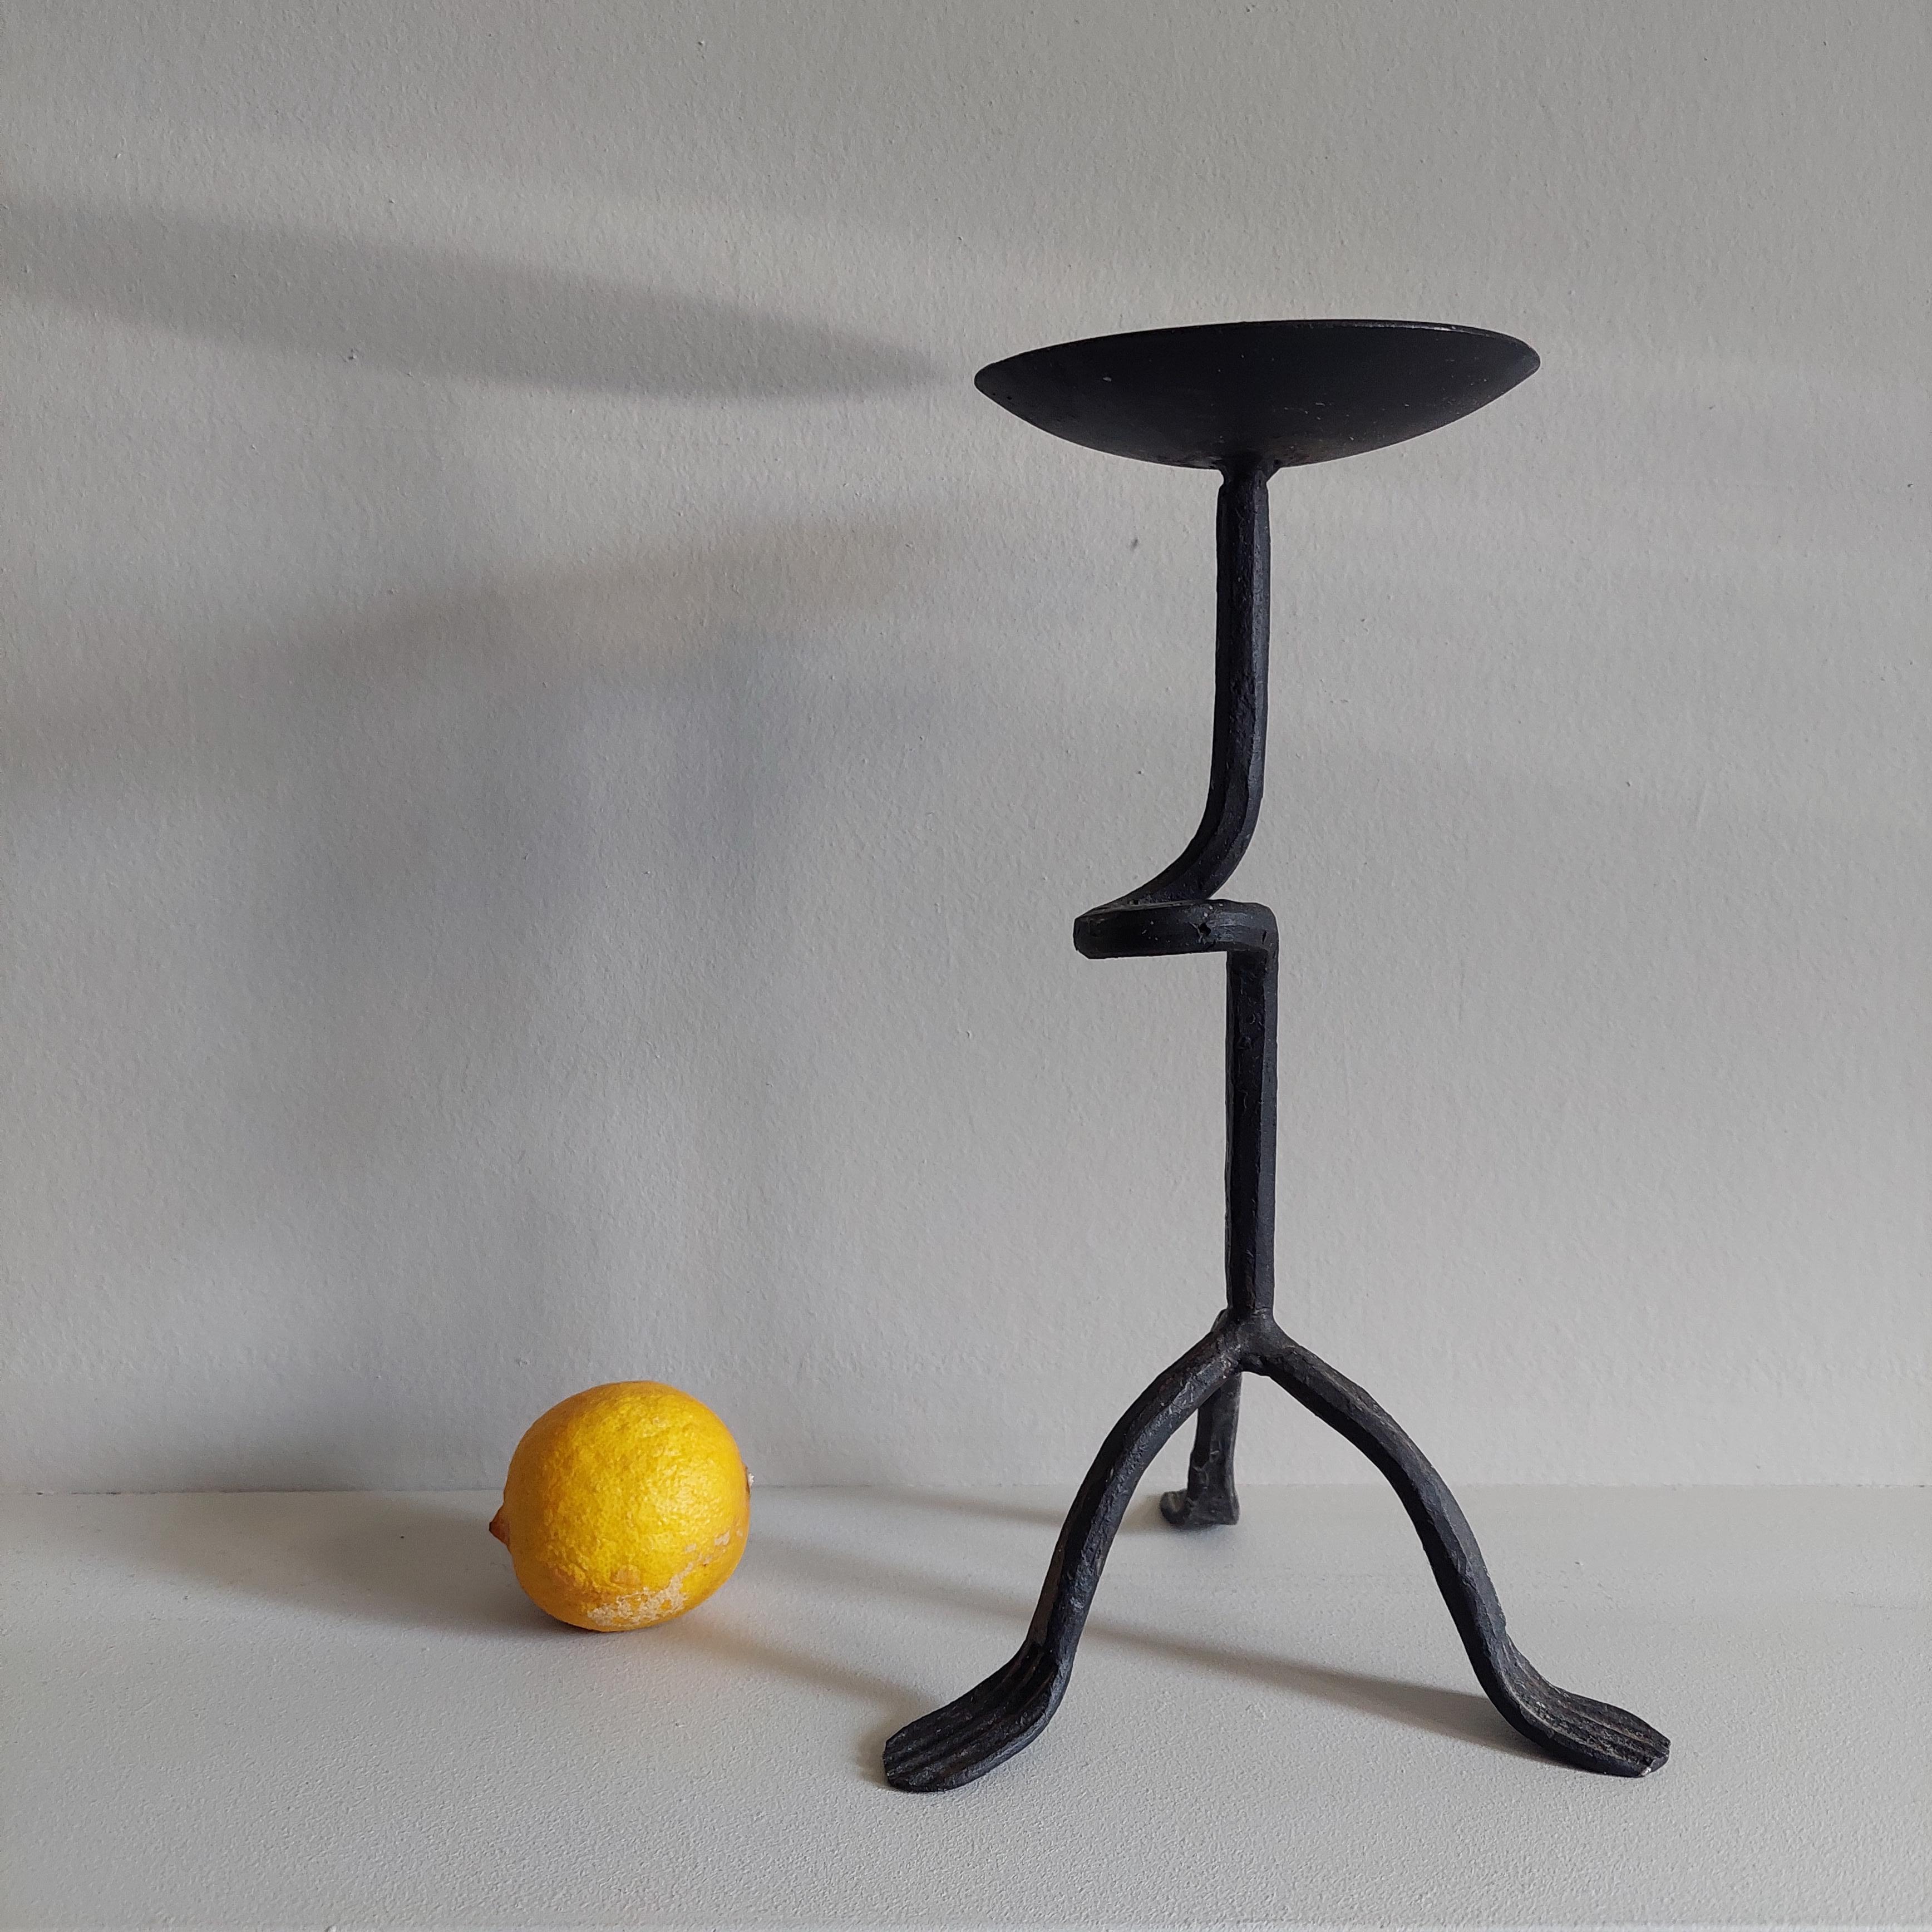 Rustic black wrought iron candle stick holder from France

This is a rare shaped wrought iron tripod candlestick...dating most probably from the mid century, 1950s
Vintage Rustic candle stick holder with a simple looped stem. 
This vintage